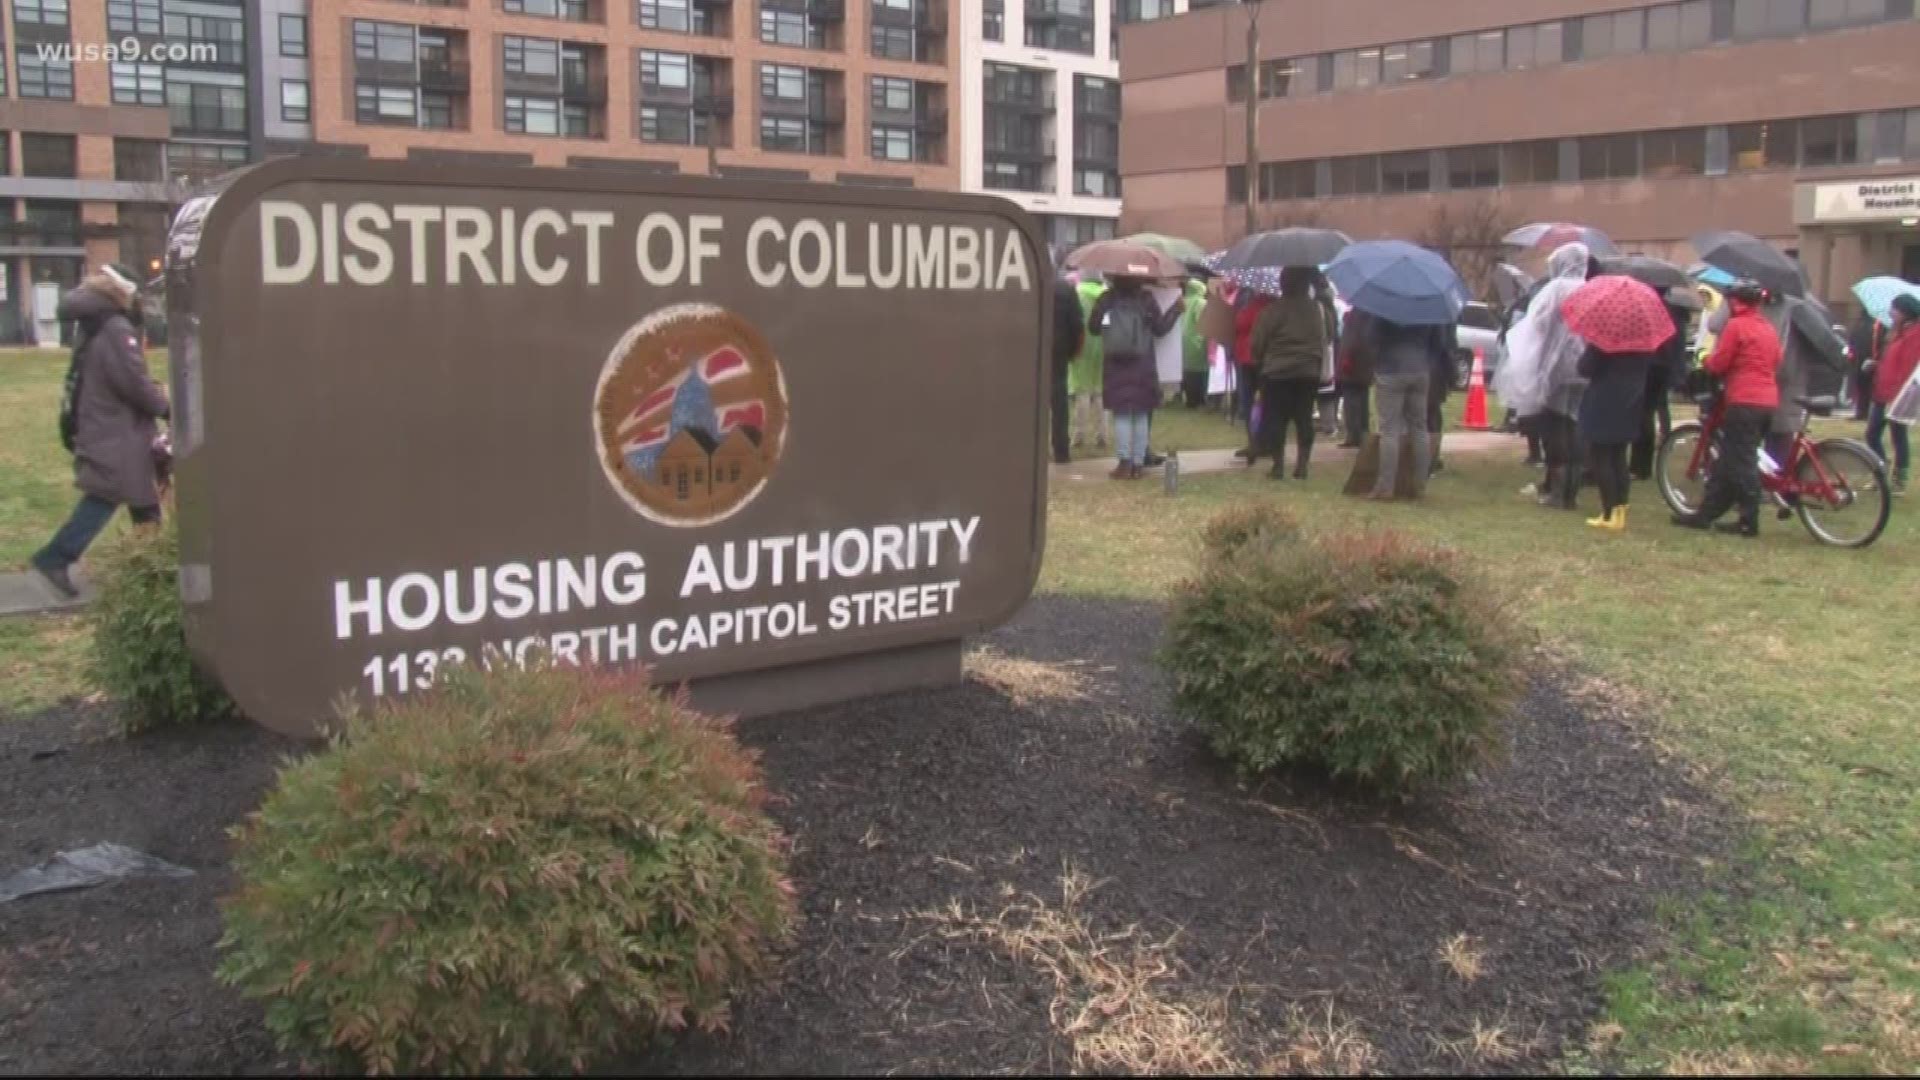 Public housing advocates say some residents could be evicted, but public housing officials insist nobody will be evicted as part of its major overhaul.